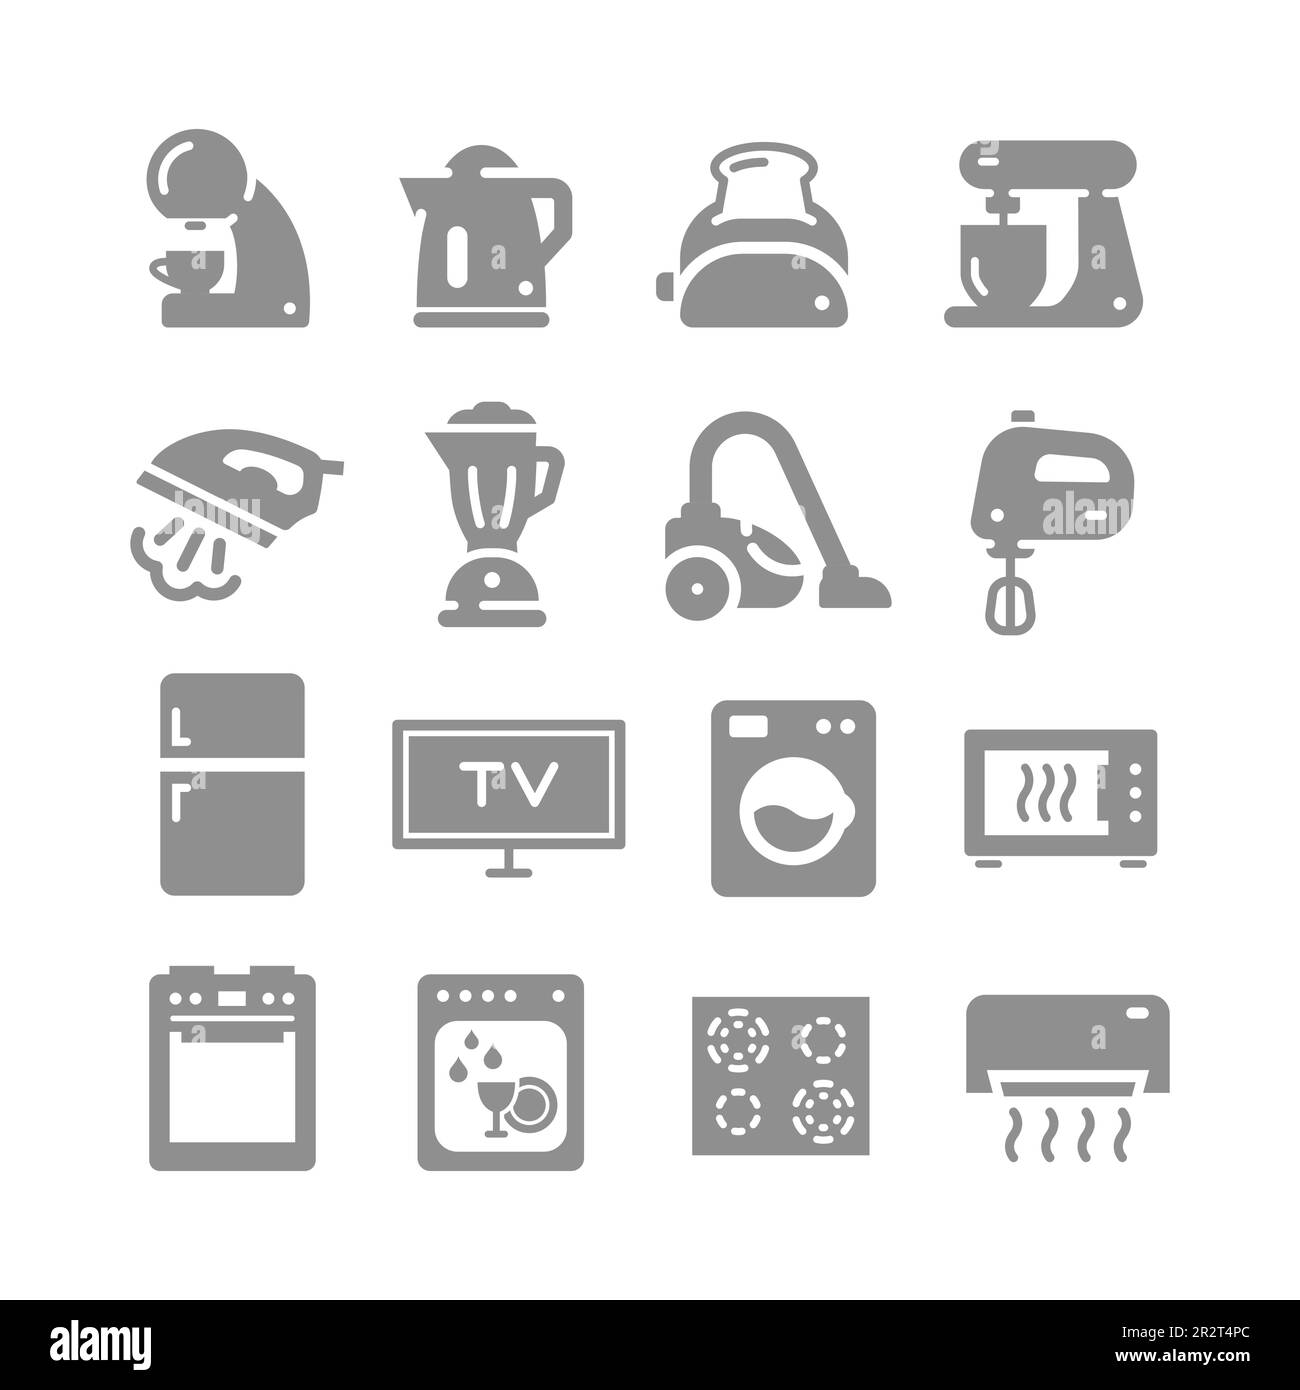 Household appliances fill vector icon set. Home appliances, oven, stove icons. Stock Vector